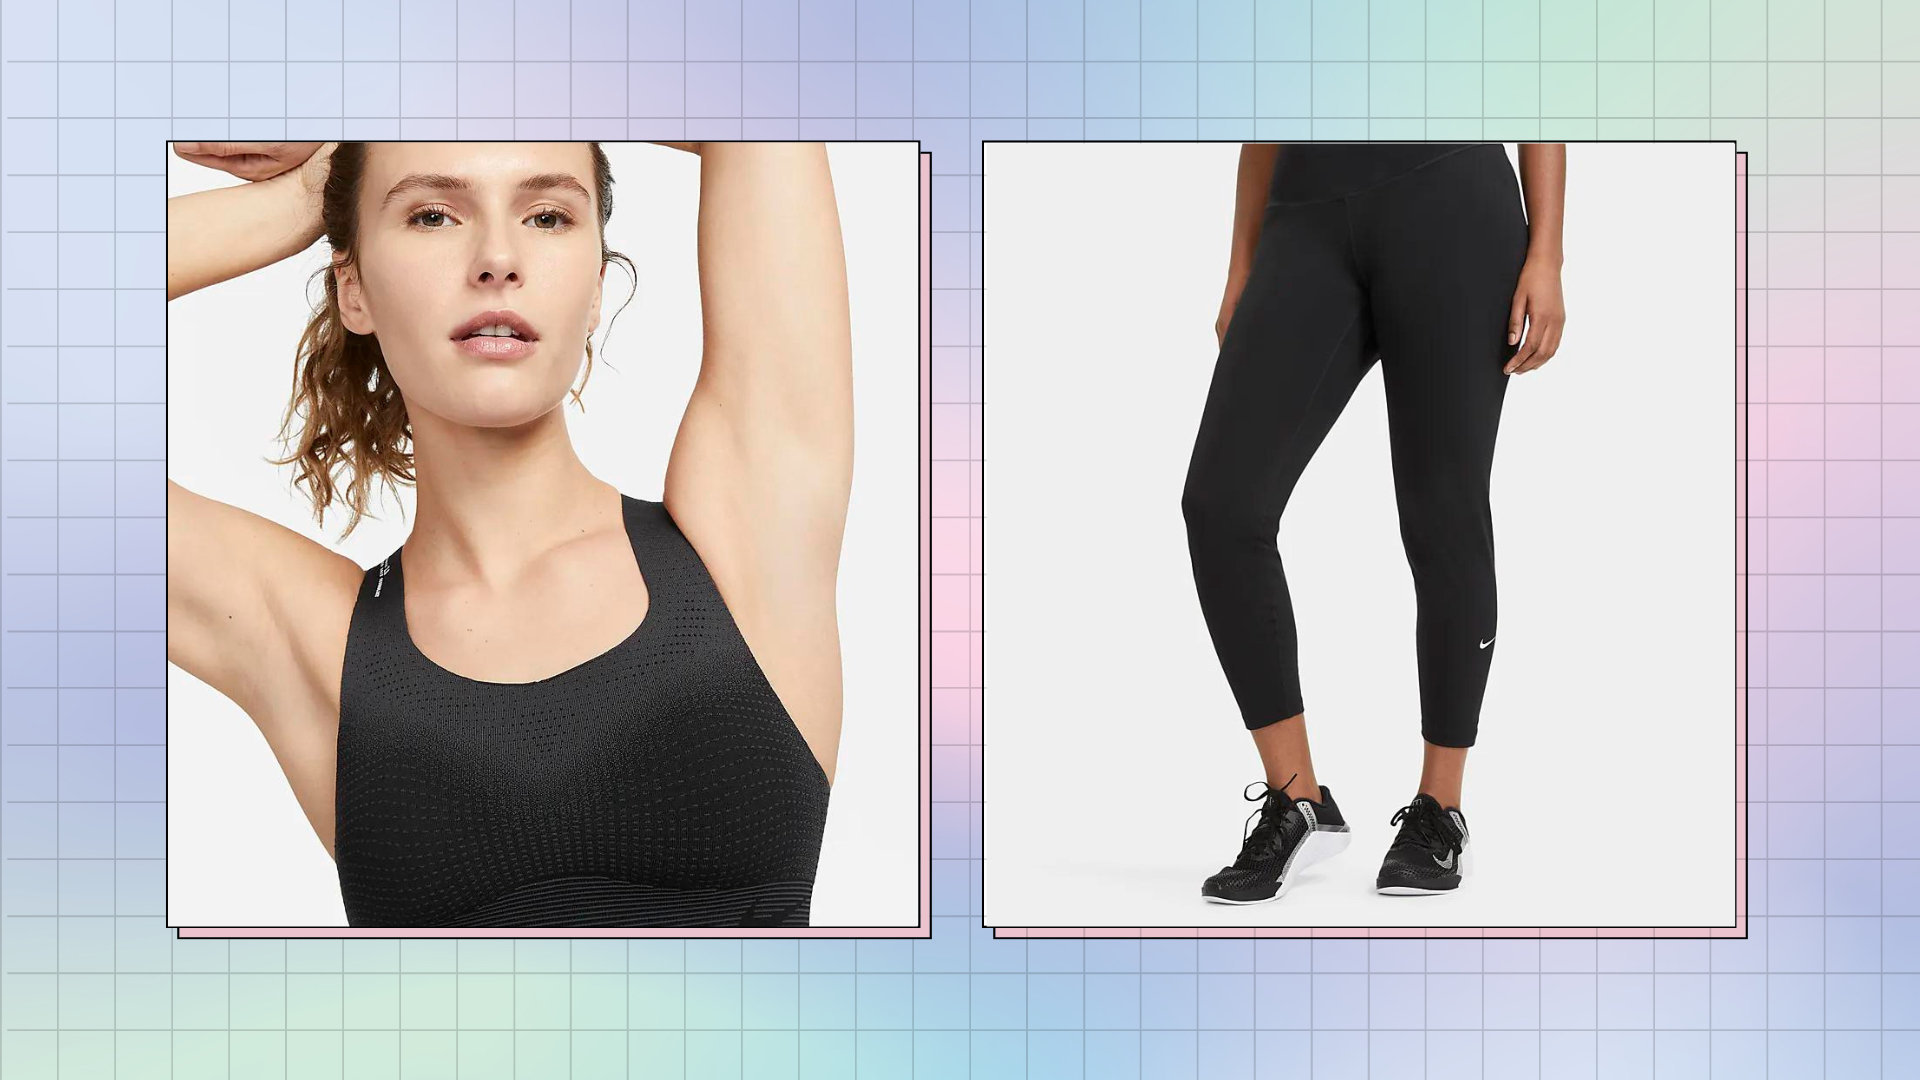 Nike workout clothes: we review the top picks